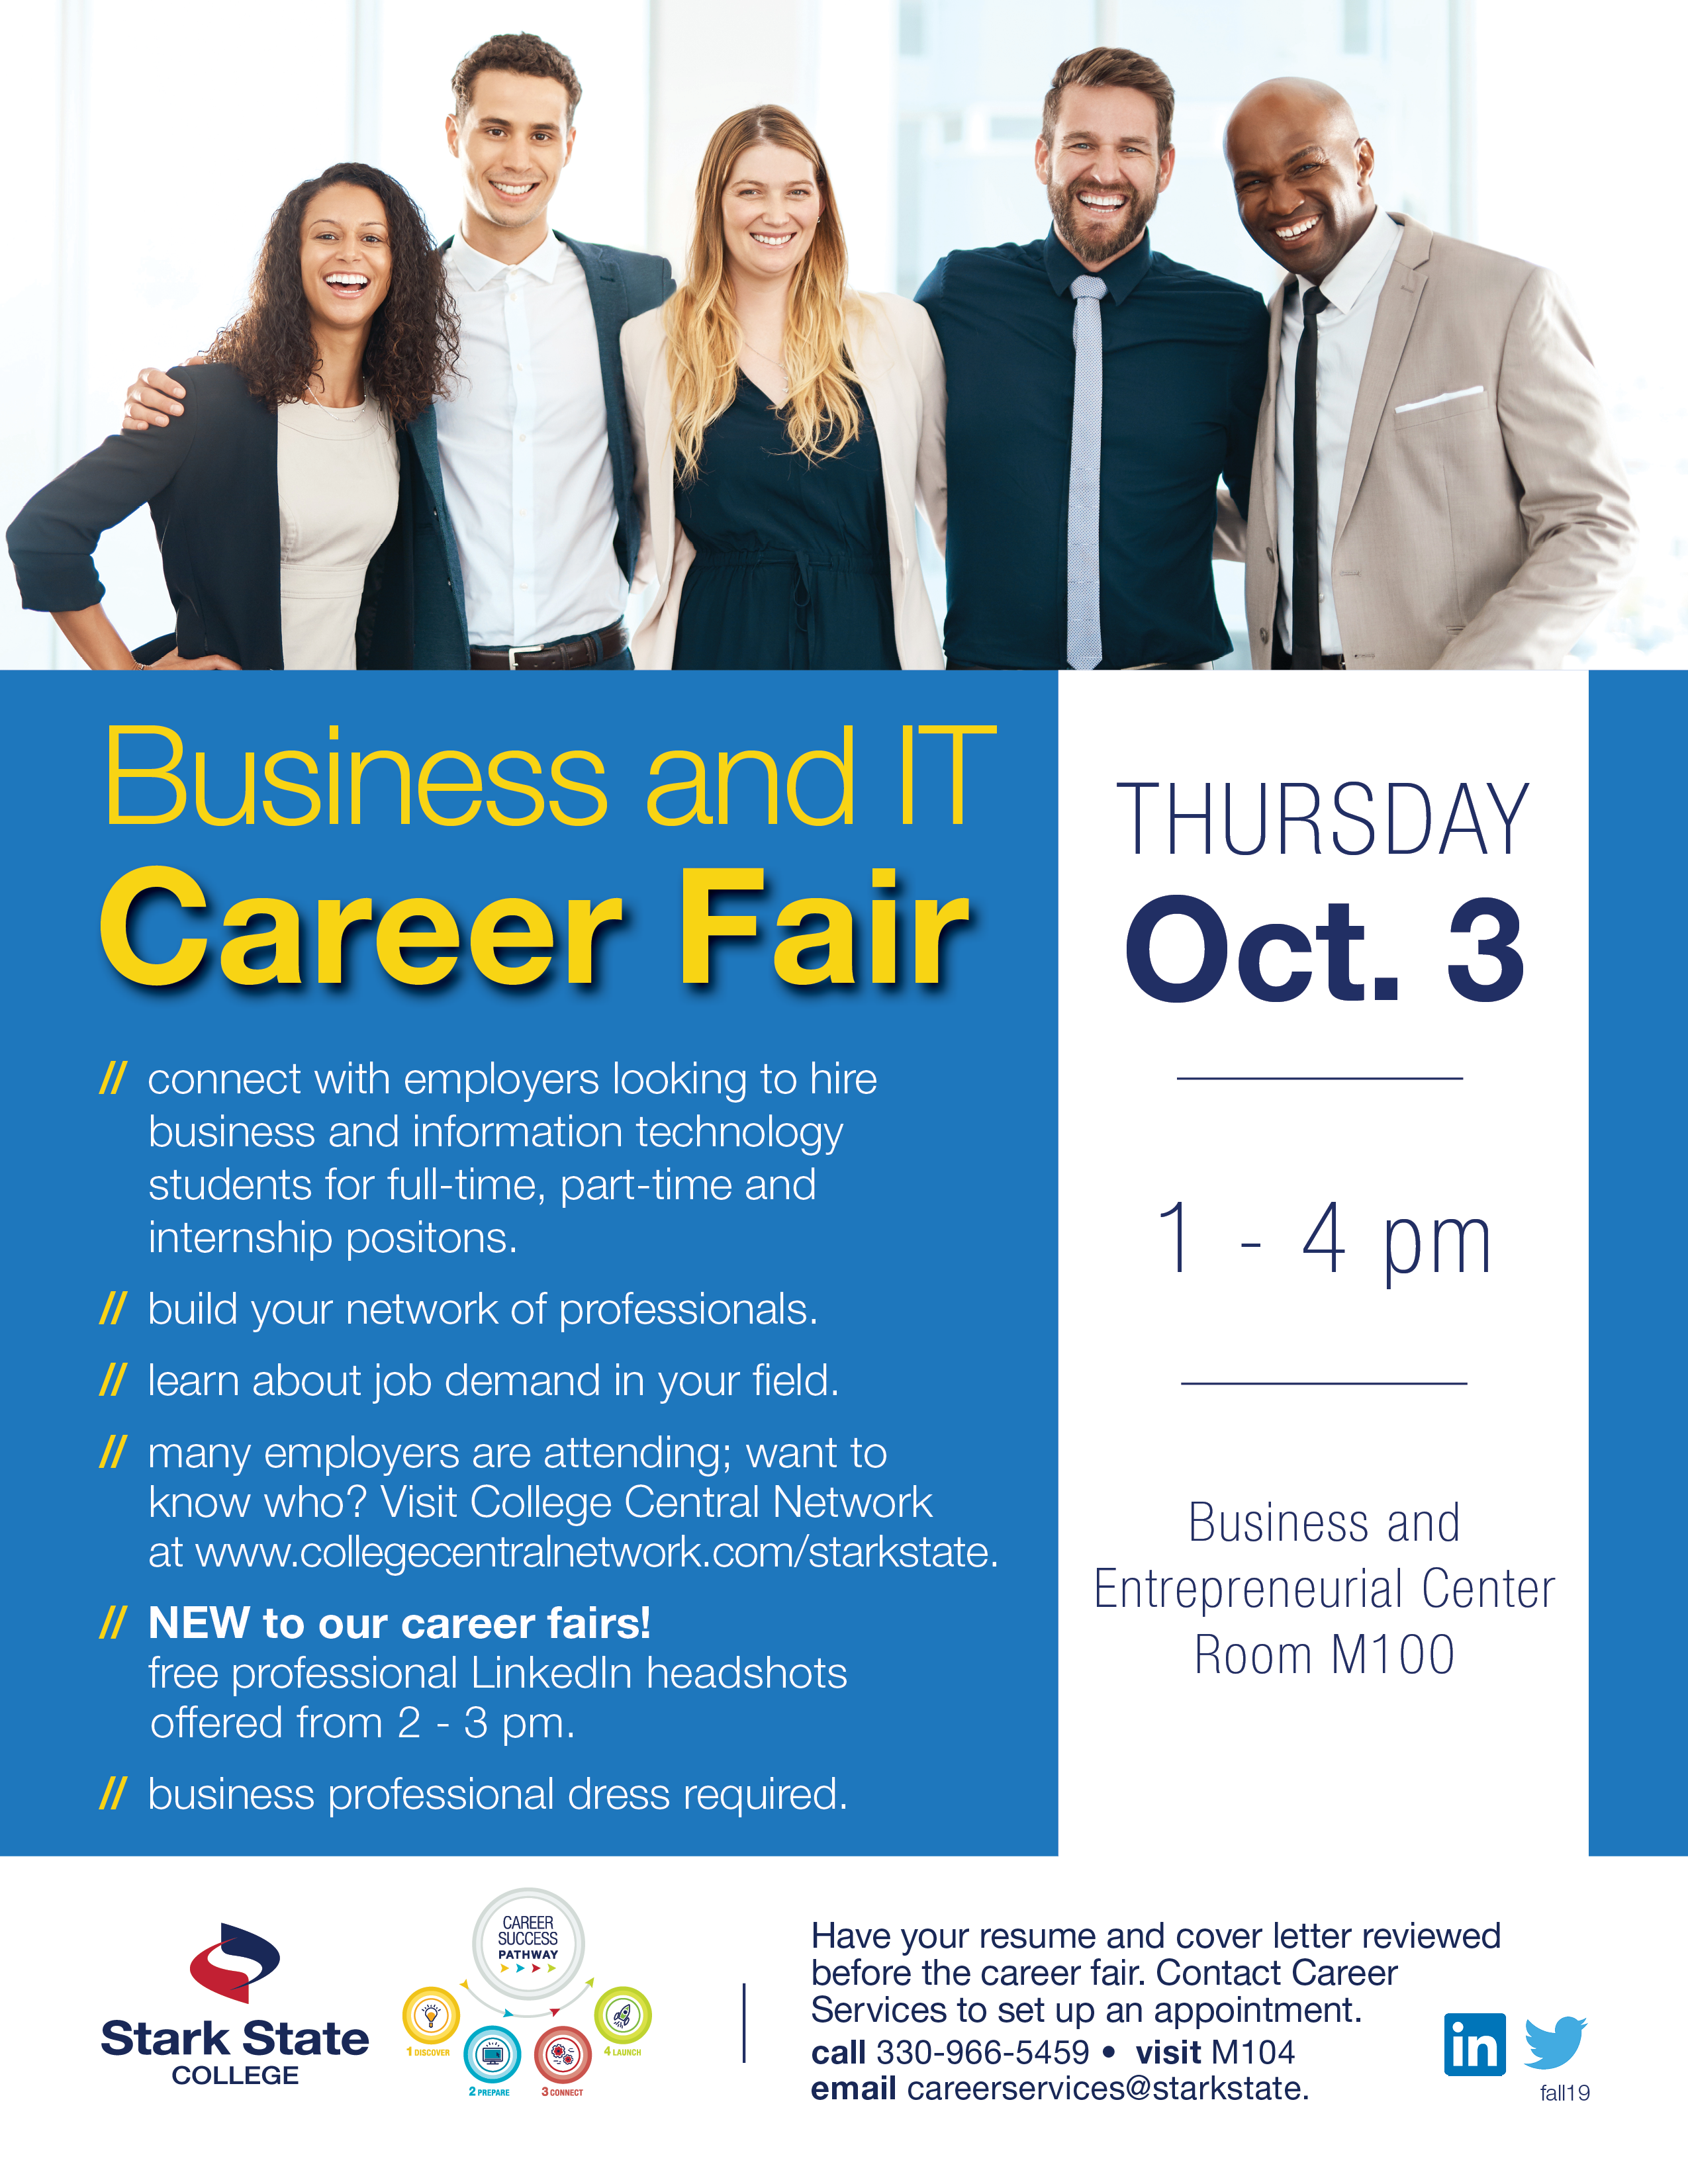 Business and IT Career Fair @ main campus | M100